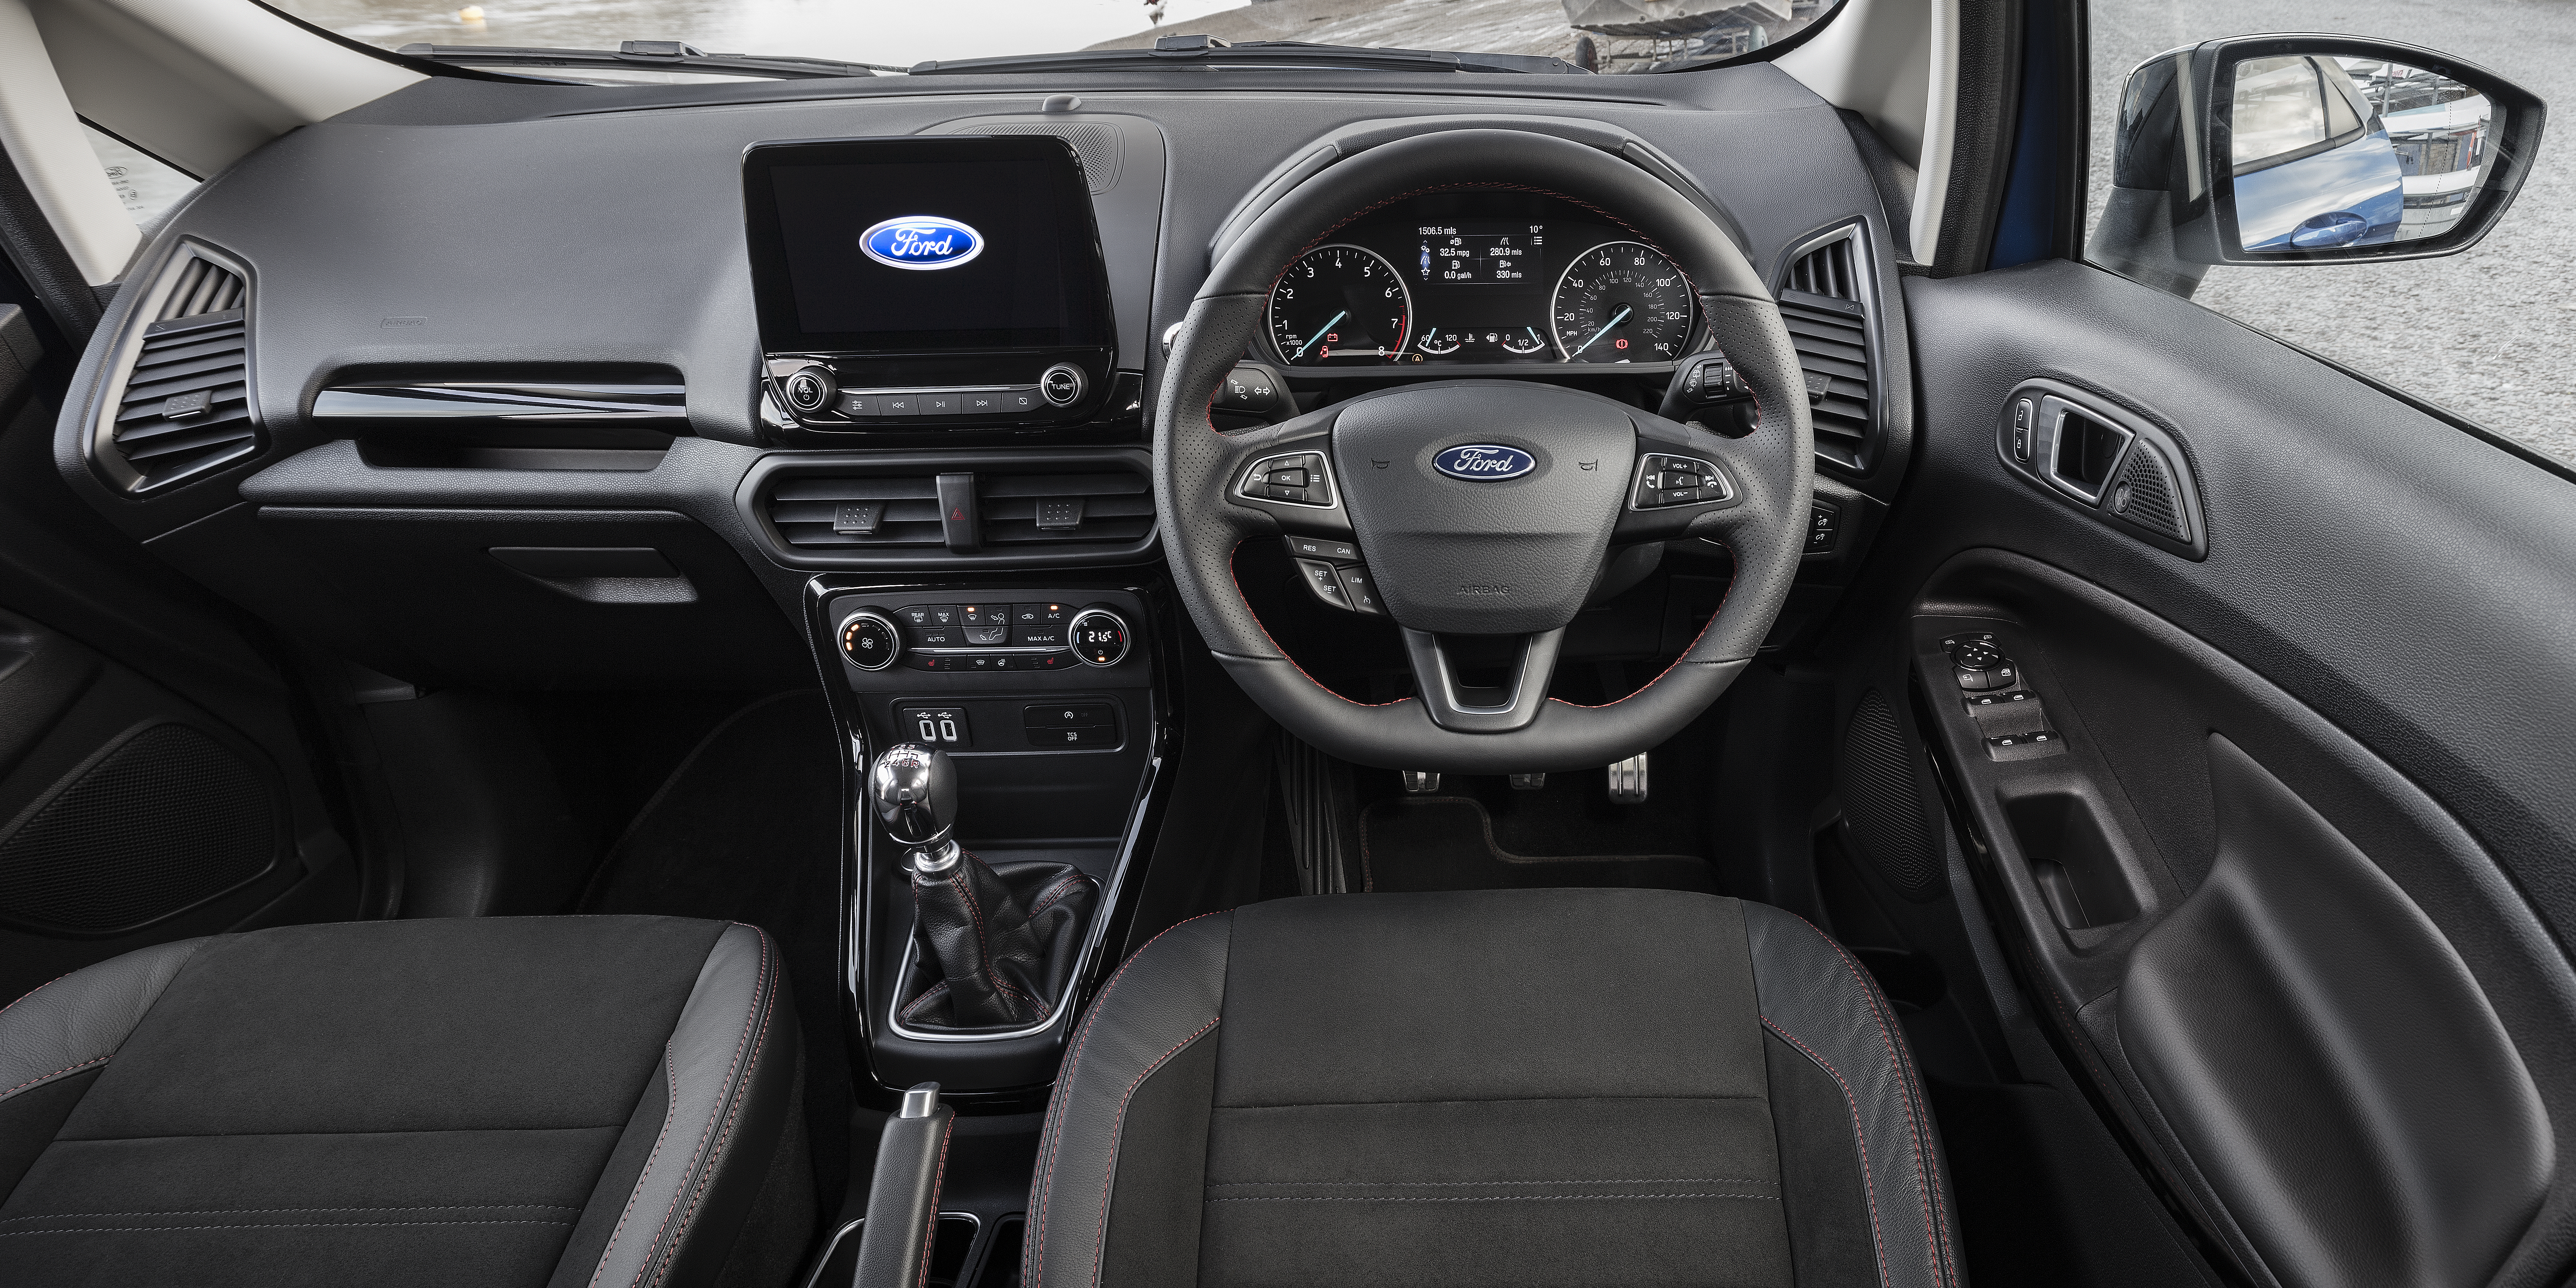 Interior - Ford showcases India-made EcoSport S at Frankfurt Motor Show |  The Economic Times